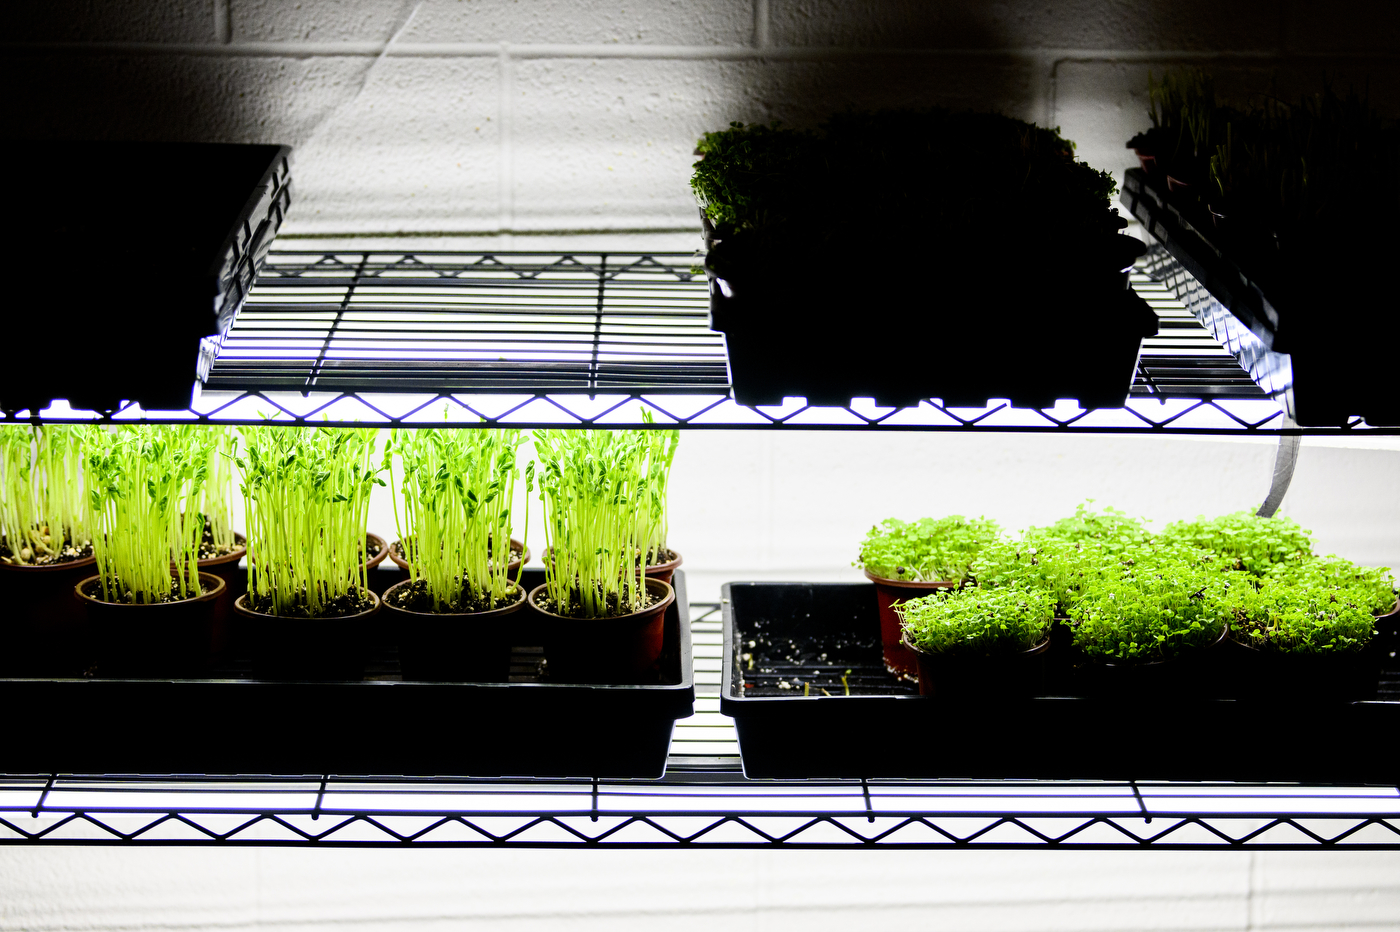 rows of microgreens on wire shelves